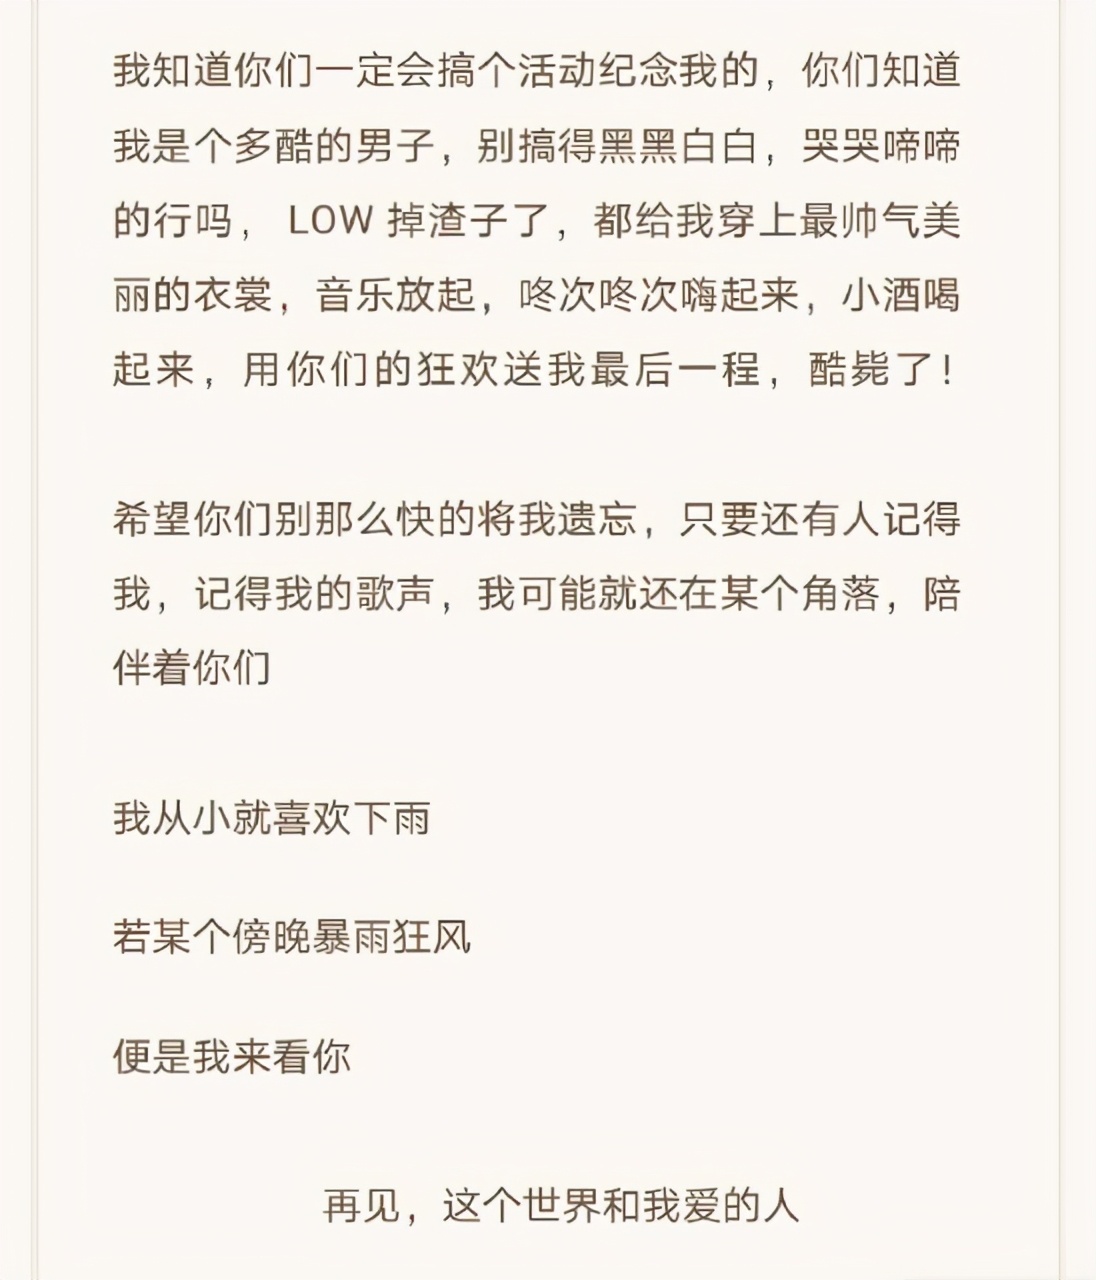 Exposure of spot of Zhao Yingjun memorial meeting, xue Zhiqian hurts heart cry bitterly, huang Bo is sent off before roc king treasure is strong